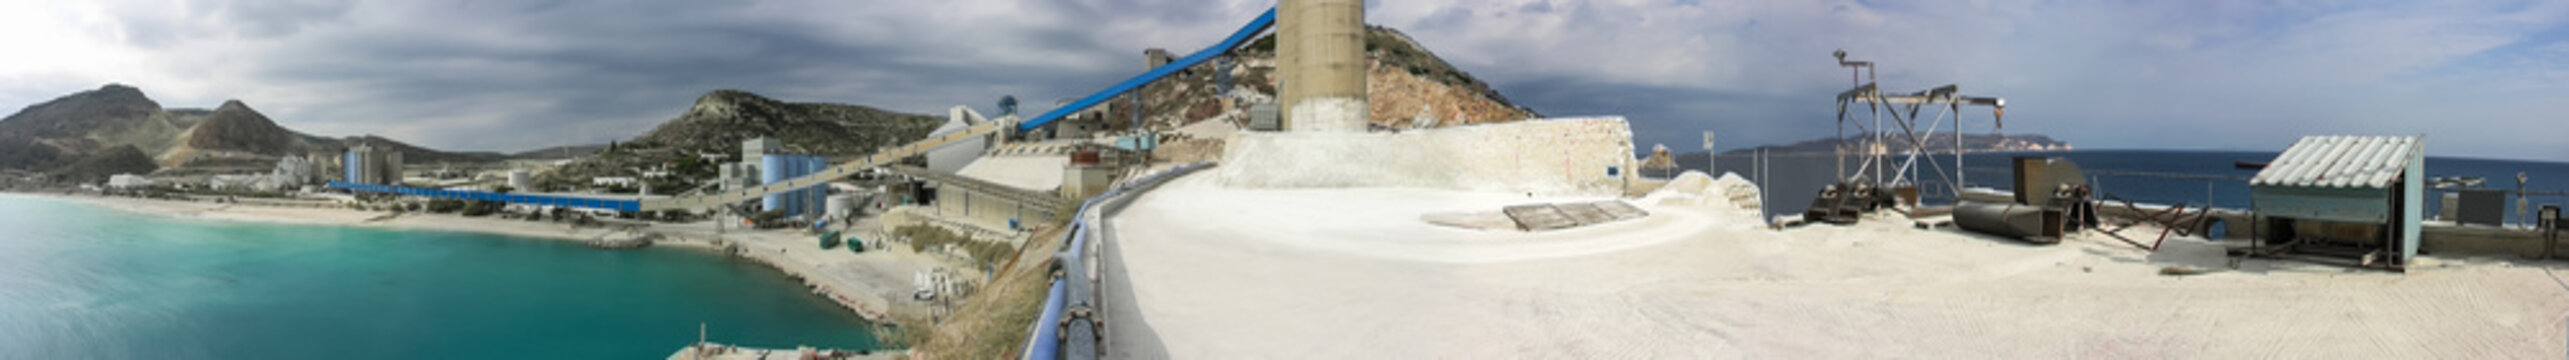 A panorama or a panoramic view of a large area of a bentonite processing plant in Greece.